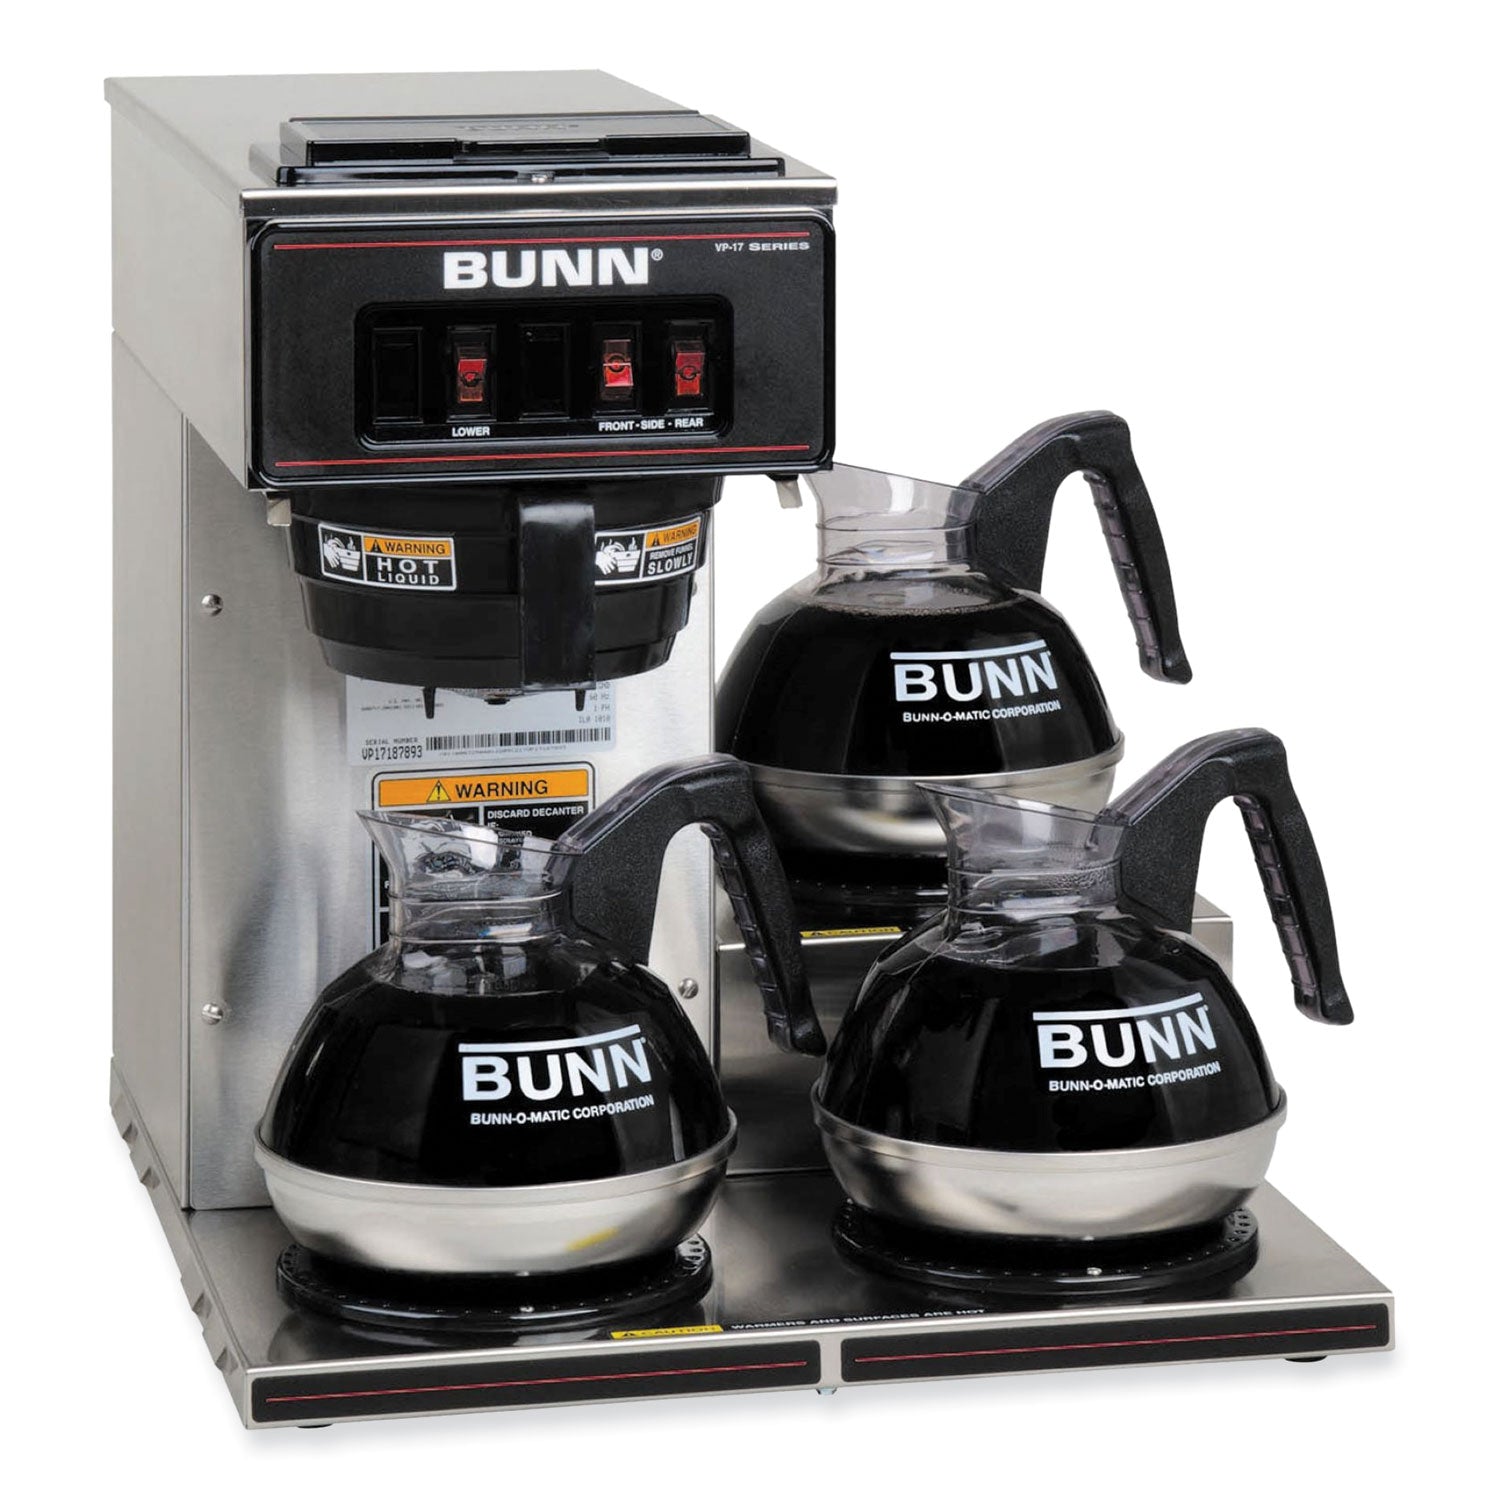 vp17-3-12-cup-pour-over-coffee-maker-with-three-warmers-stainless-steel-black-ships-in-7-10-business-days_bun133000003 - 3